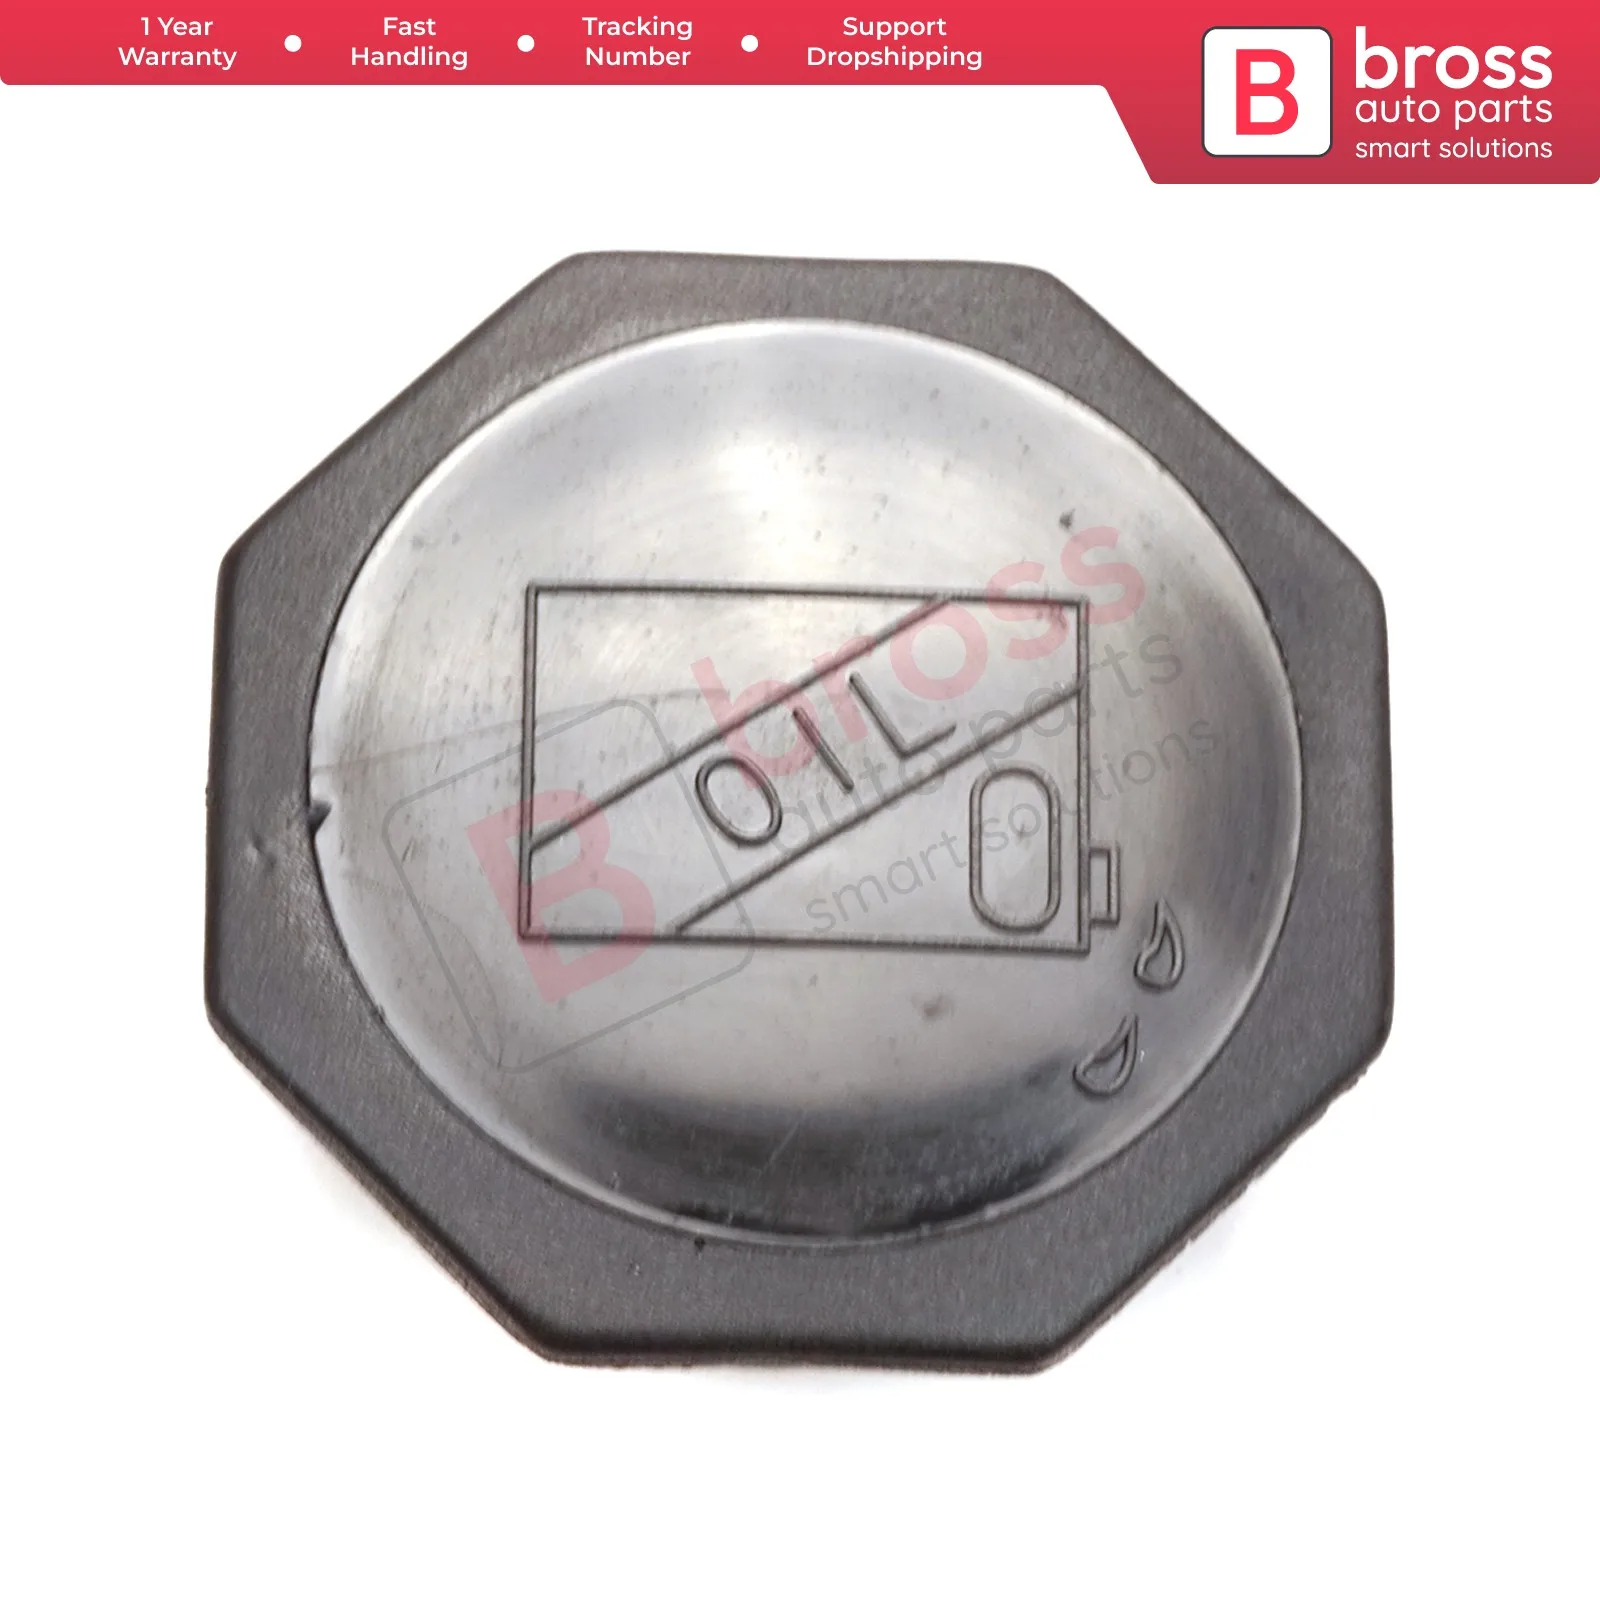 

Bross Auto Parts BSP752 Engine Oil Filler Cap for Dacia 1310 Fast Shipment Free Shipment Ship From Turkey Made in Turkey